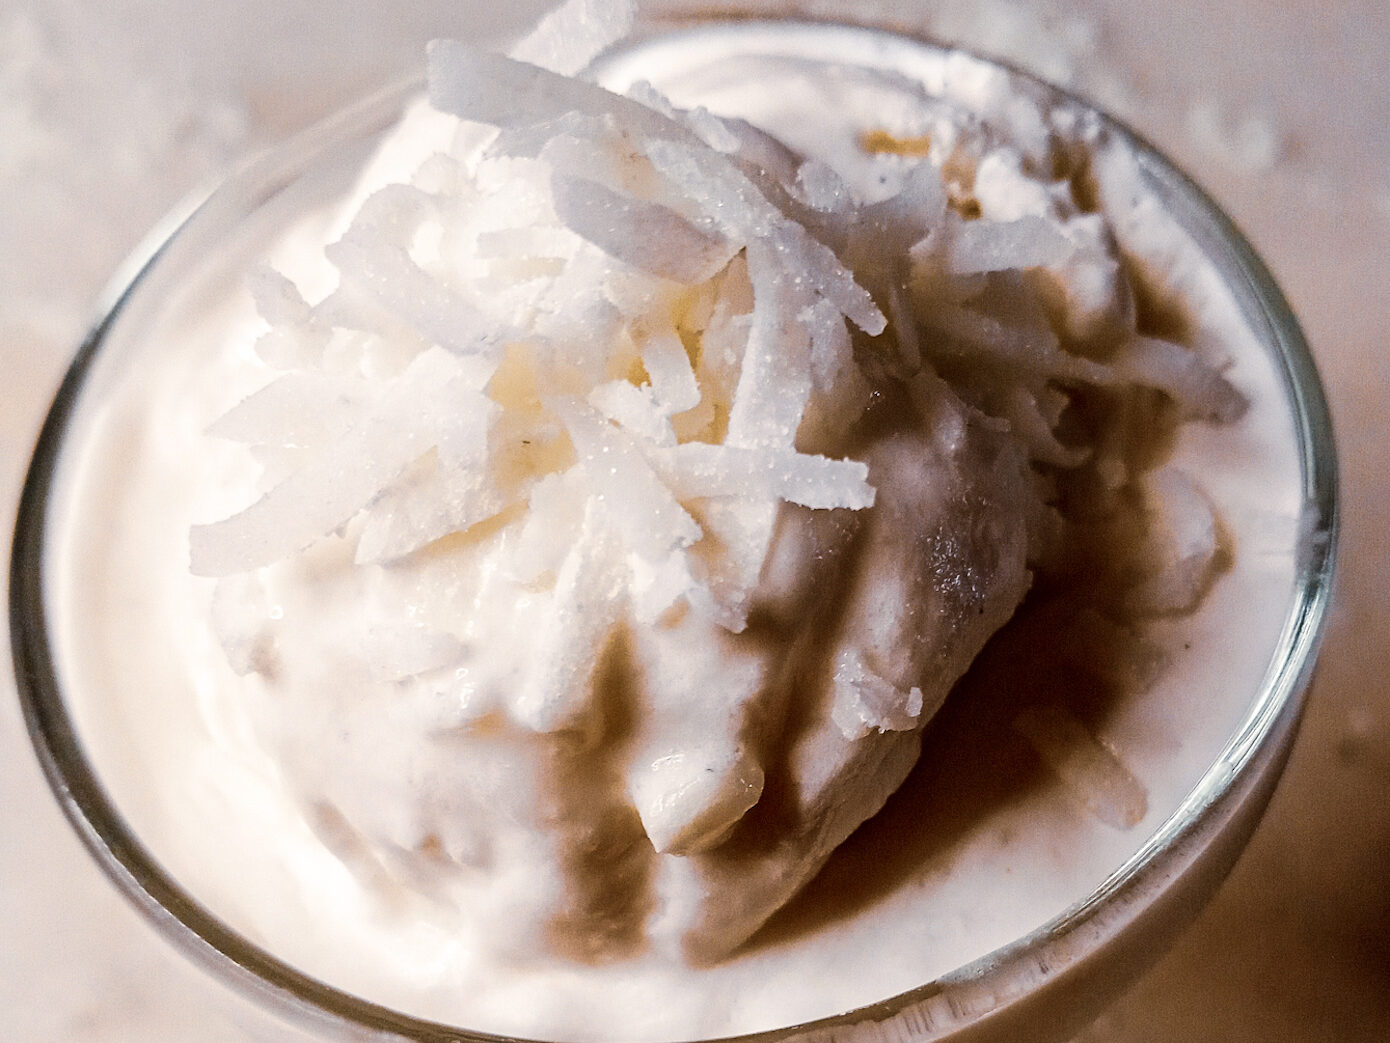 jelly coconut ice cream in a glass with shredded coconut